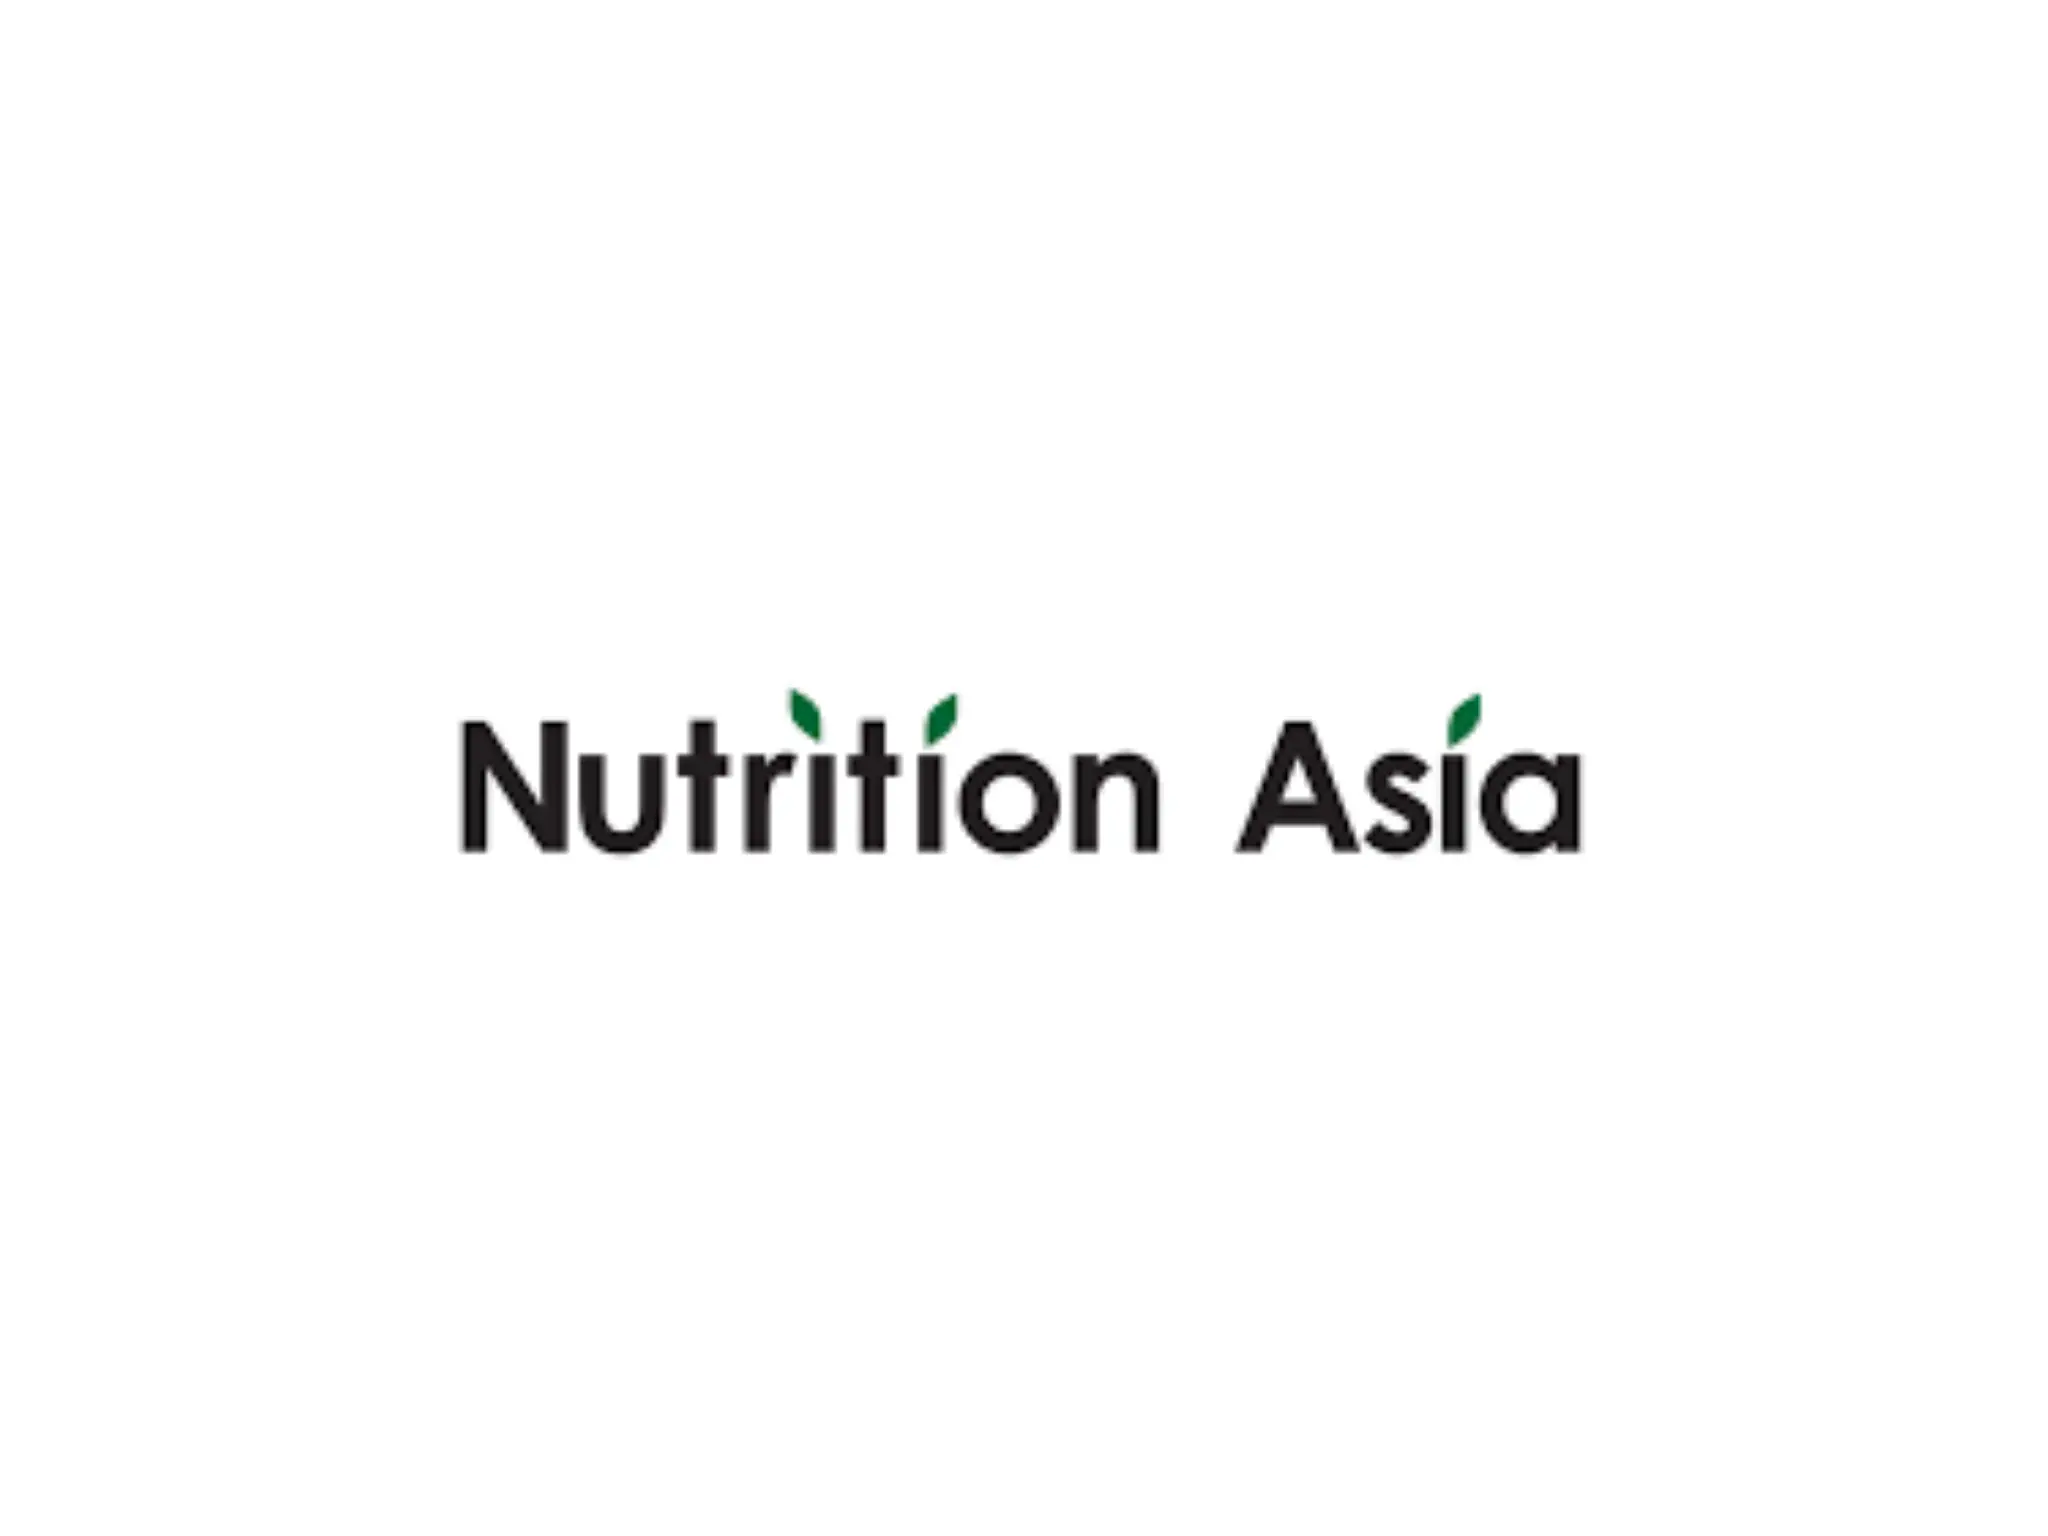 NURTITION ASIA